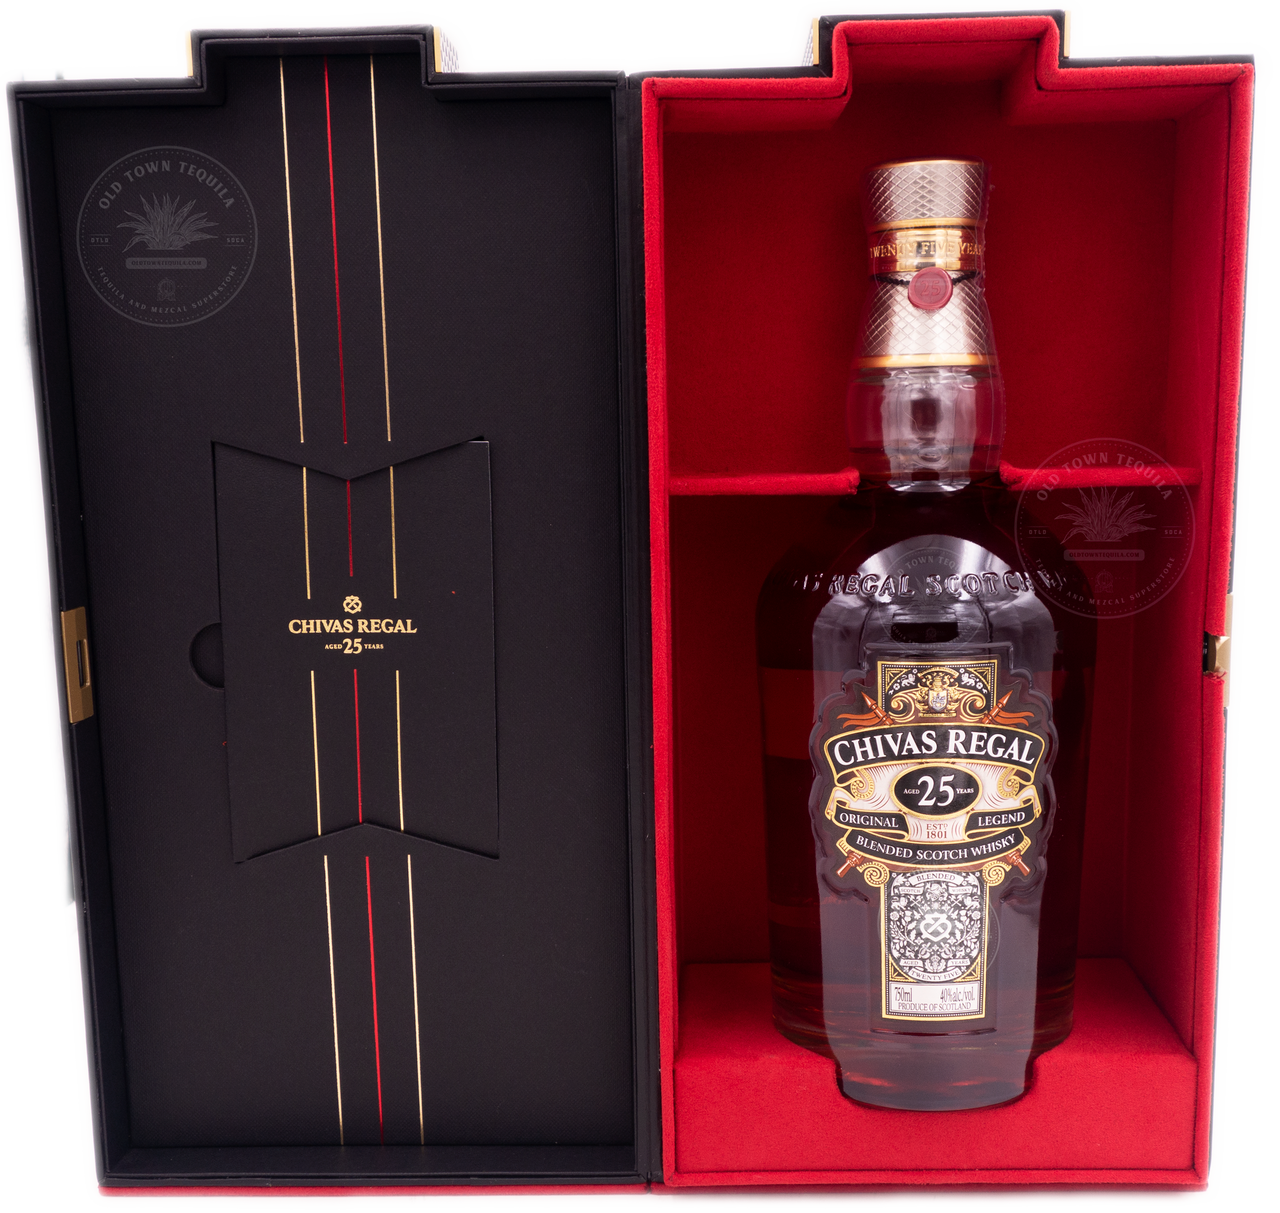 Chivas Regal XV 15-Year-Old  Blended Scotch Whisky with free glass – Wine  Depot